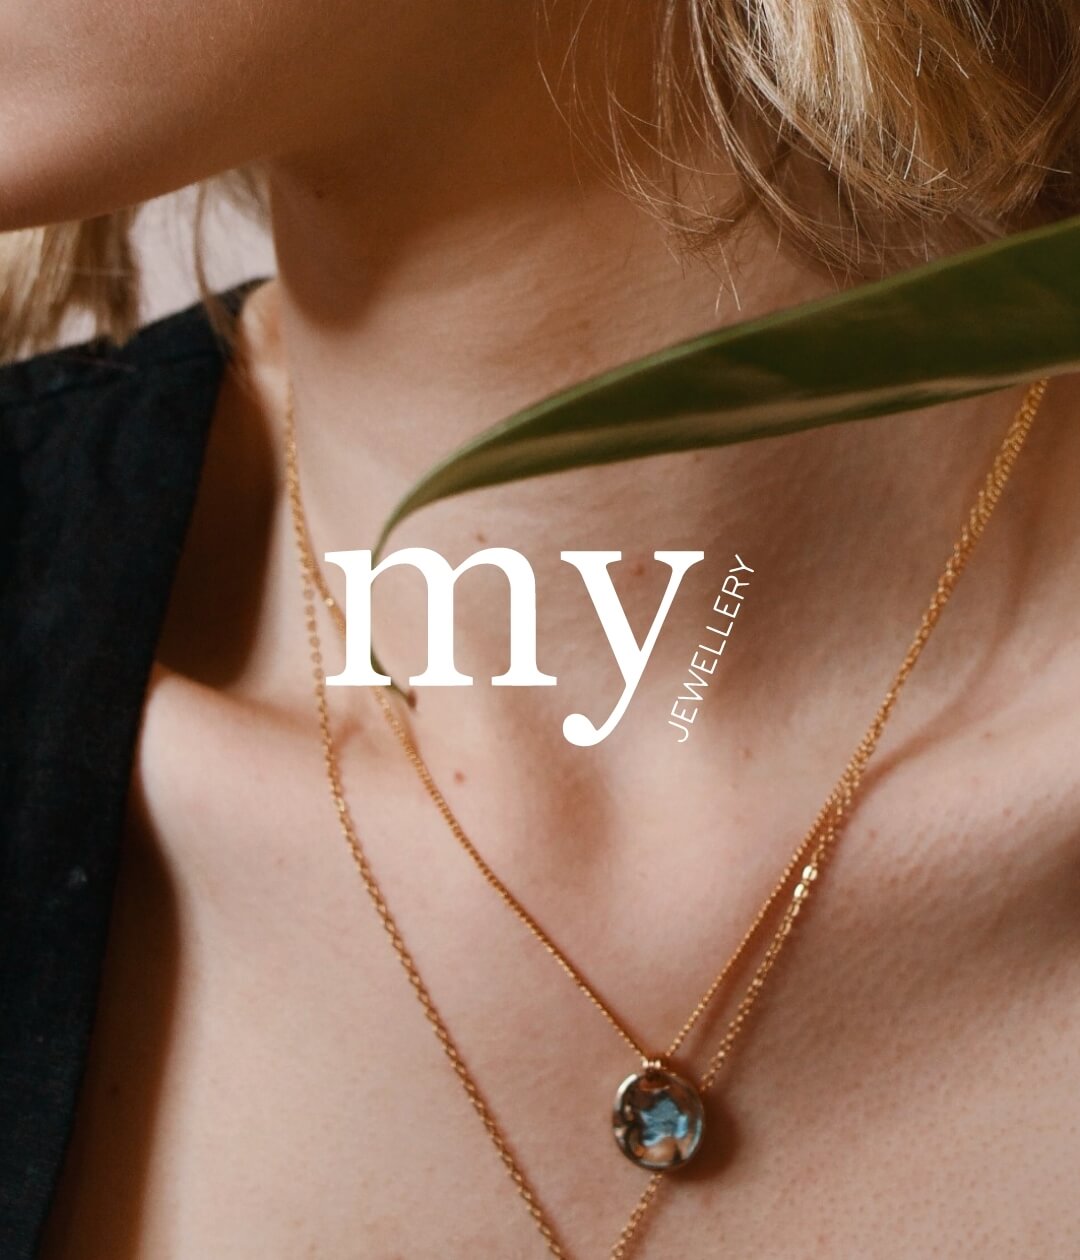 My Jewellery uses zero-party data to personalize the customer experience on their e-commerce site.